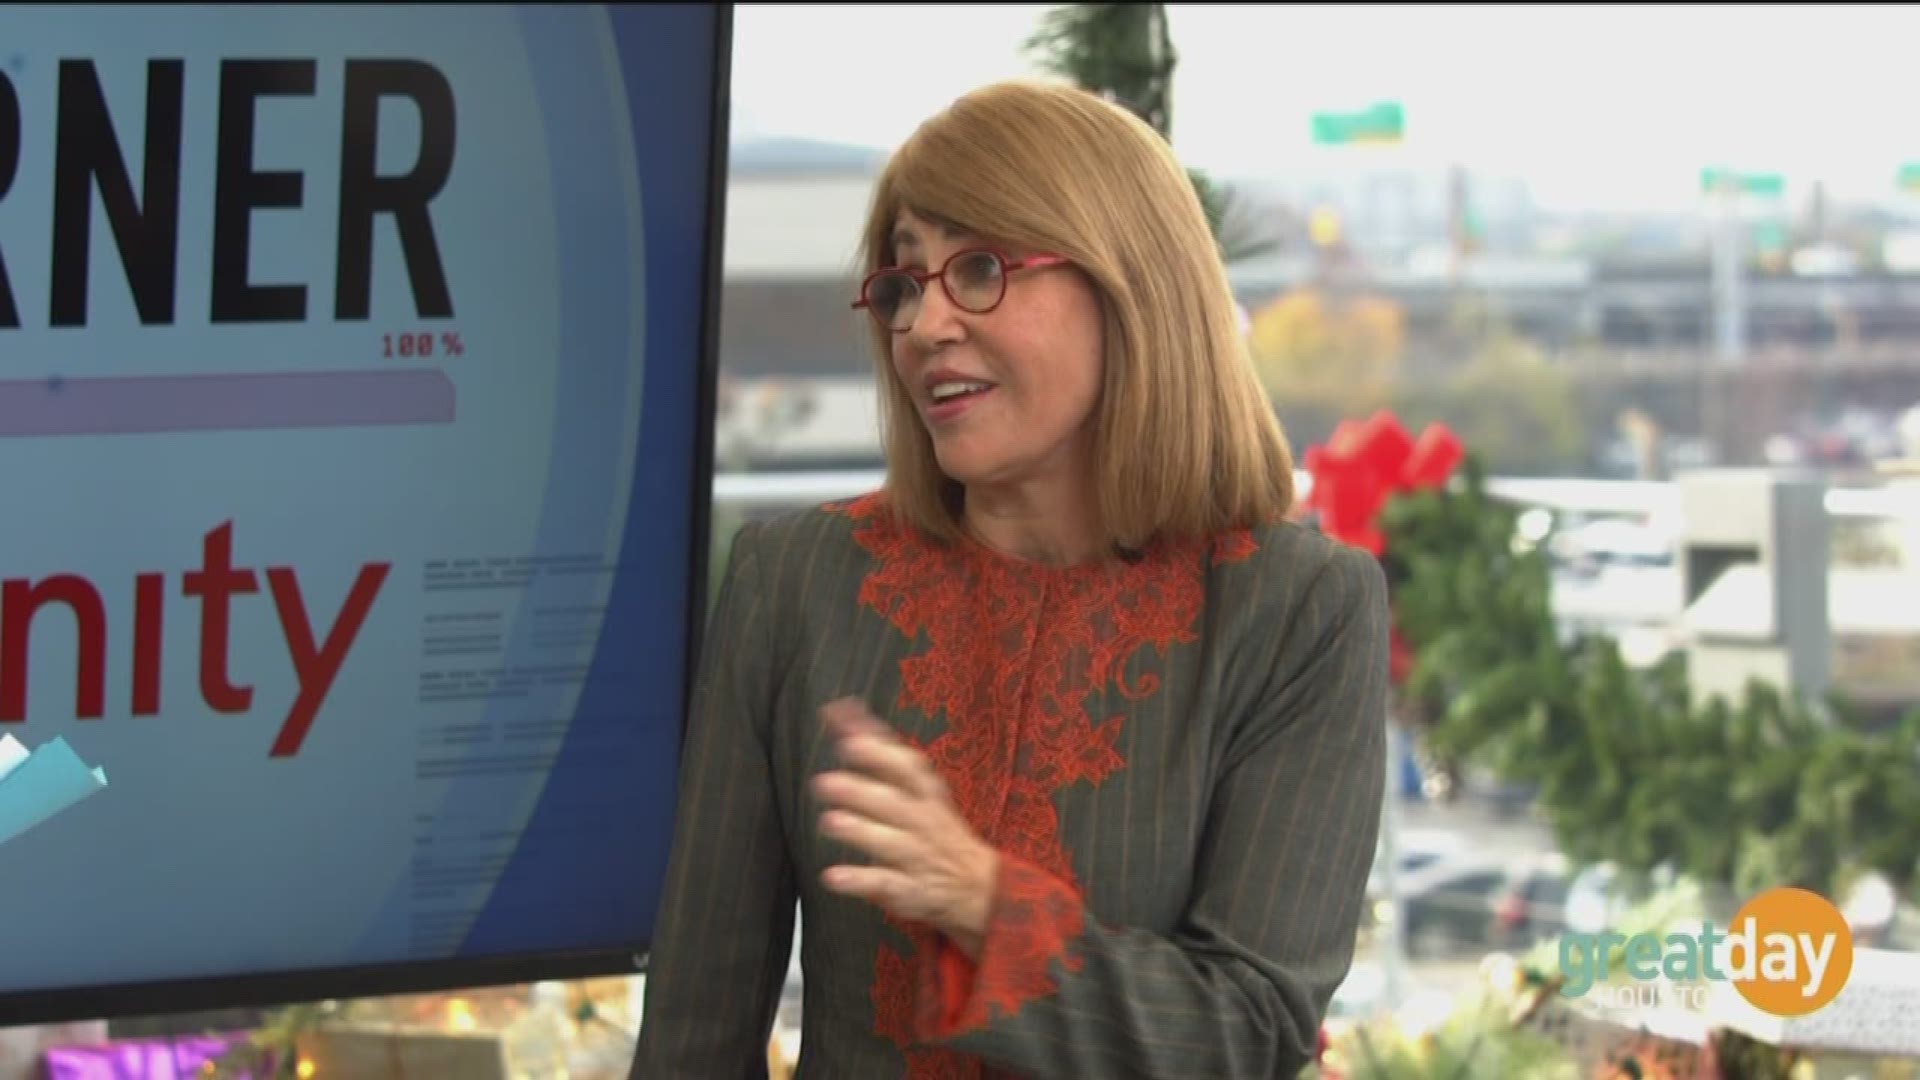 Tech expert Liz Weiman compares options to consider when selecting a gift this season.